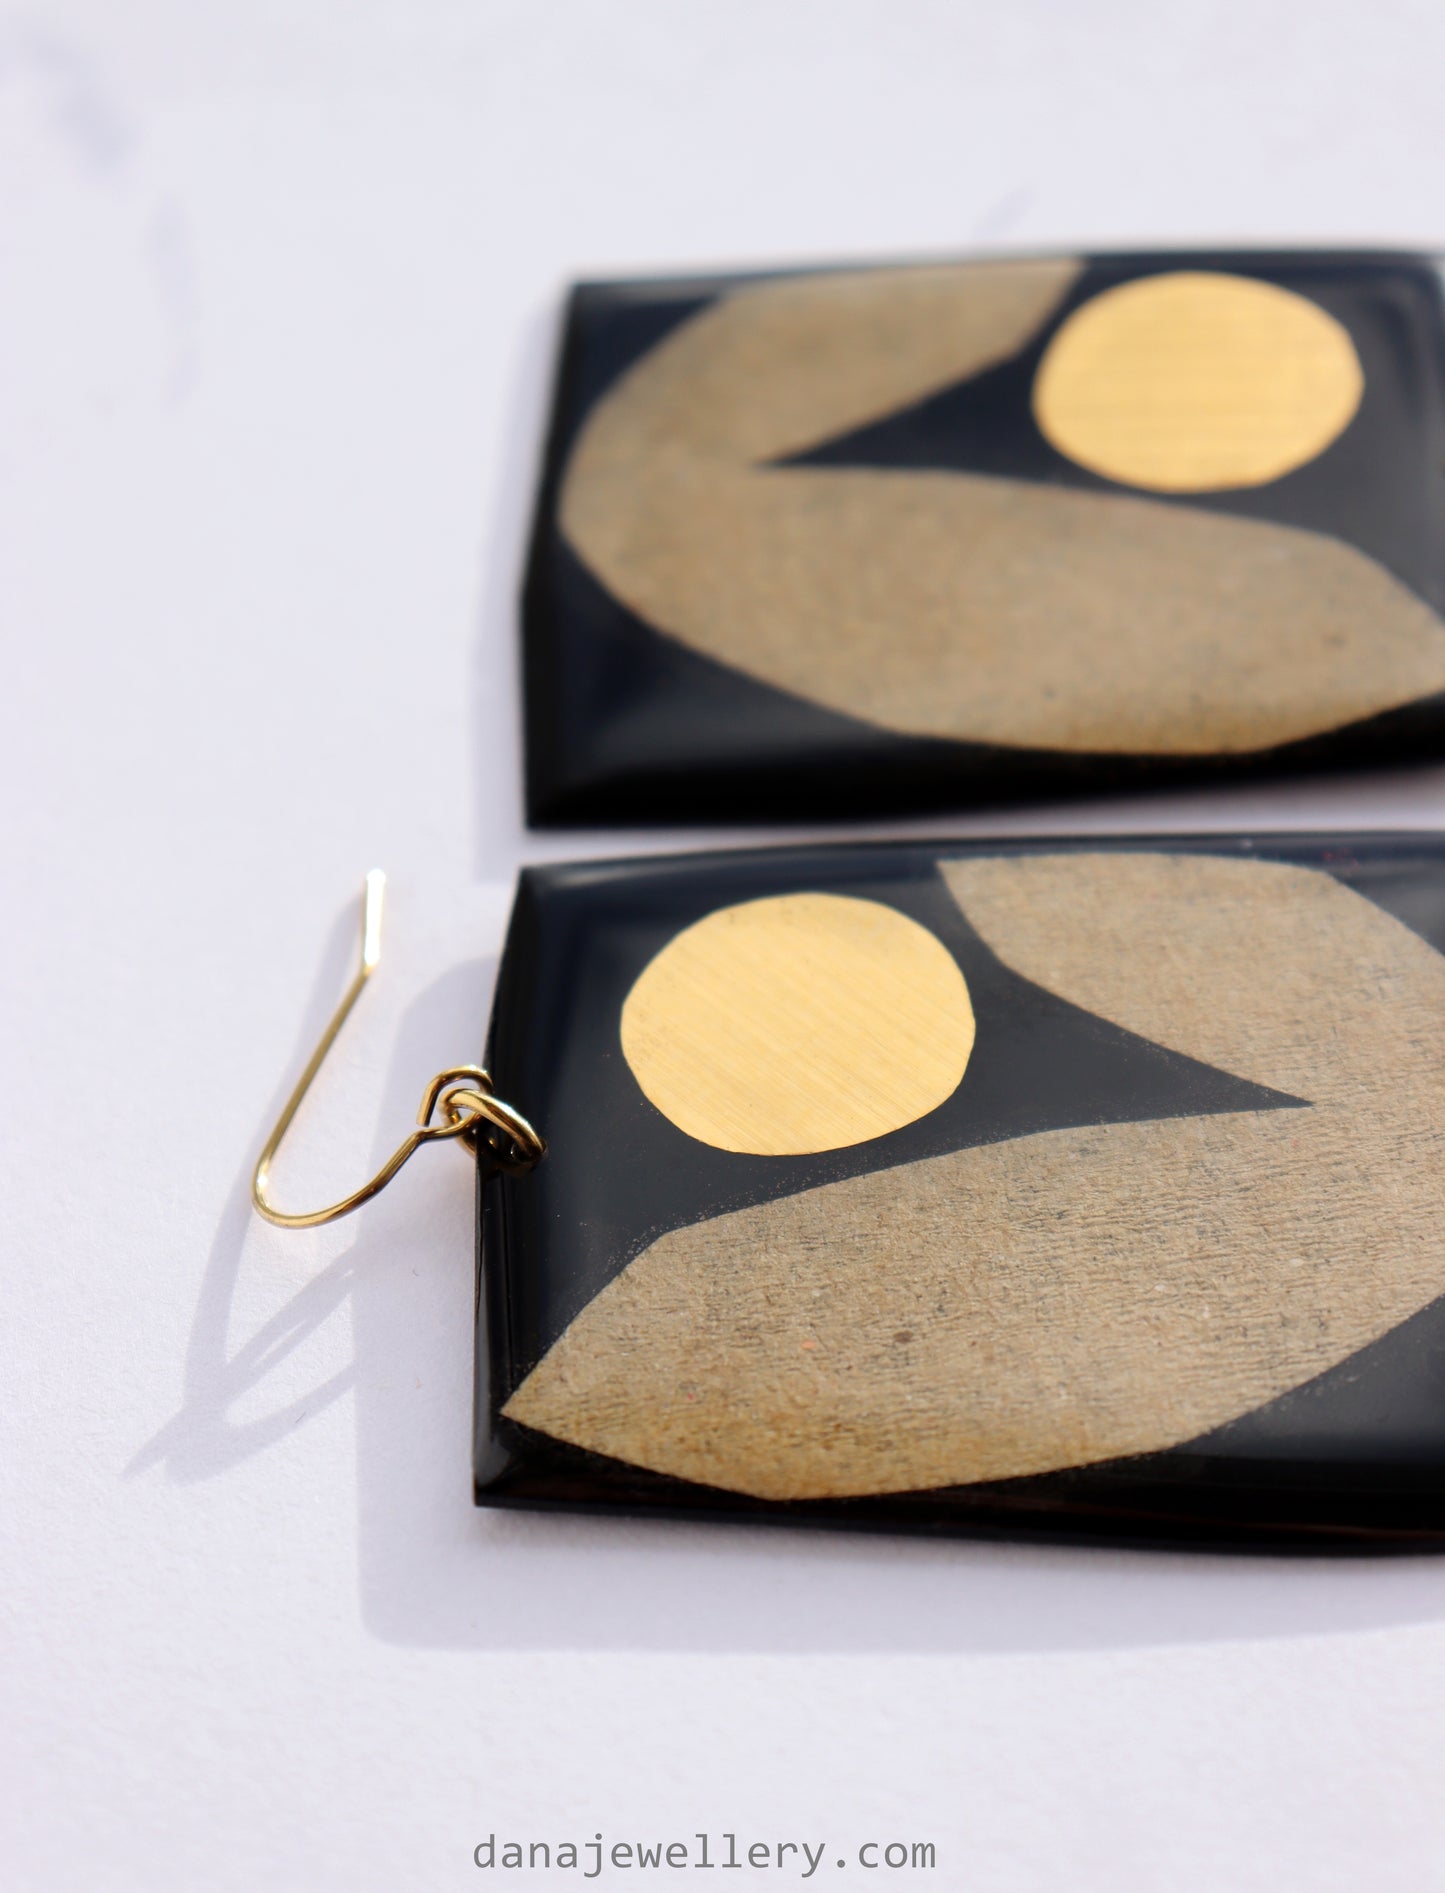 Pretty bold ONE OF A KIND statement abstract vinyl record earrings